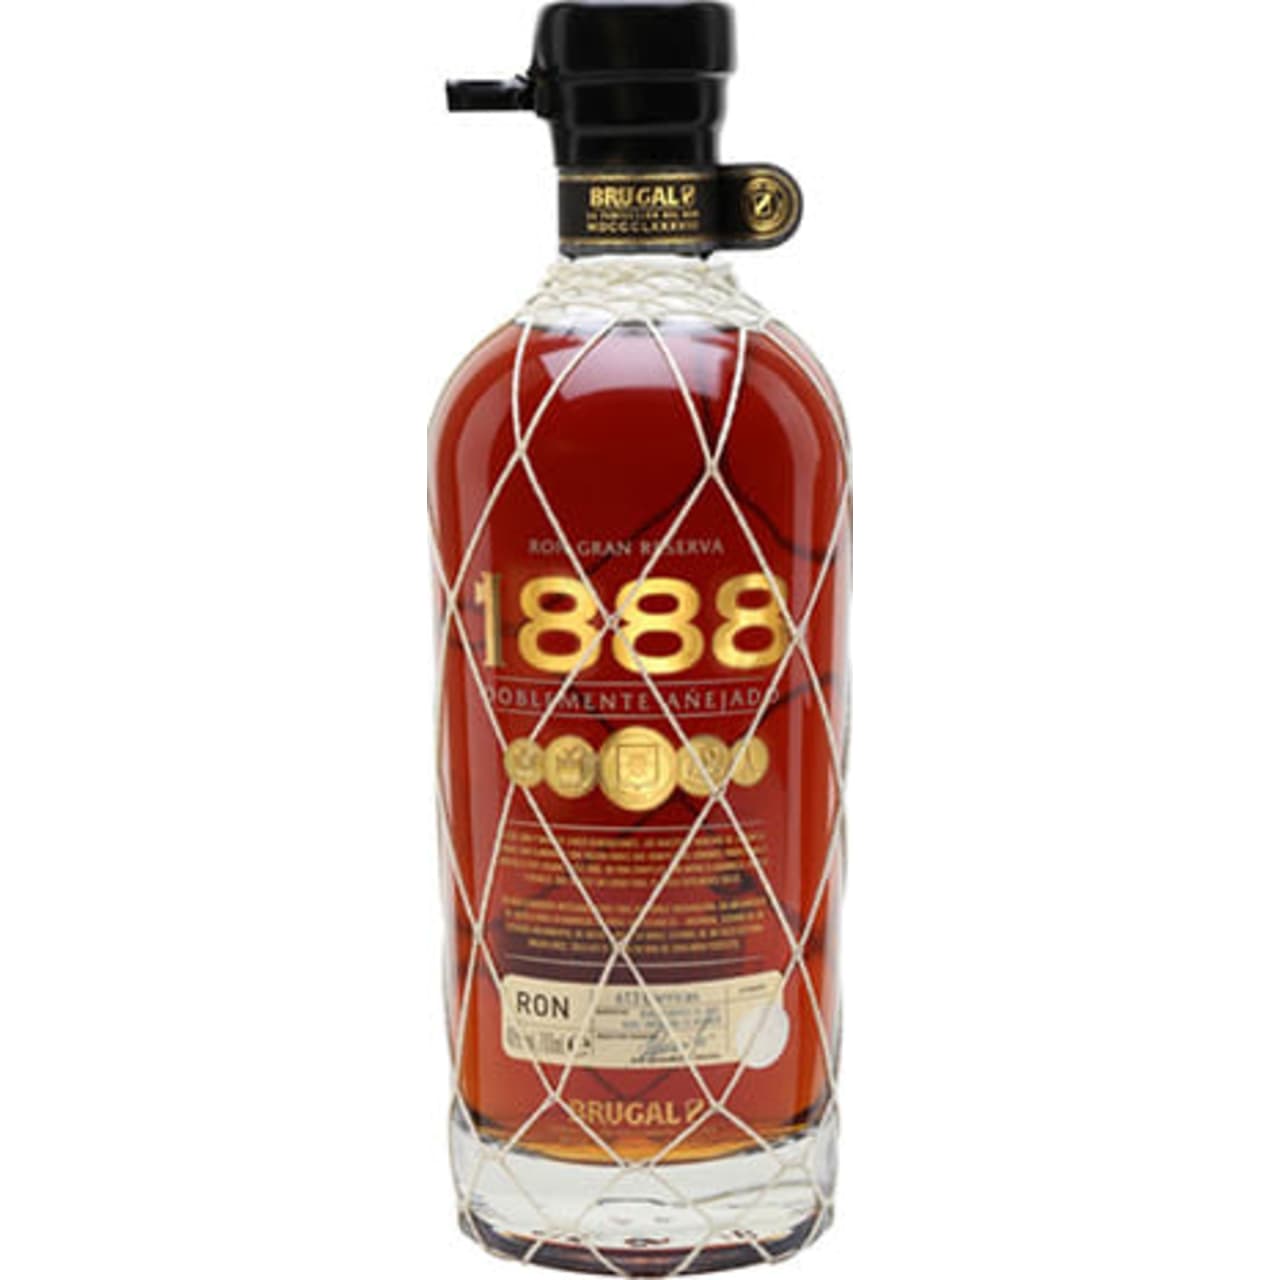 Notes of vanilla, red fruits and toffee intertwined with cocoa and natural oak spice Brugal 1888 is a wonderfully inviting spirit that is smooth, full of flavour and perfectly balanced.